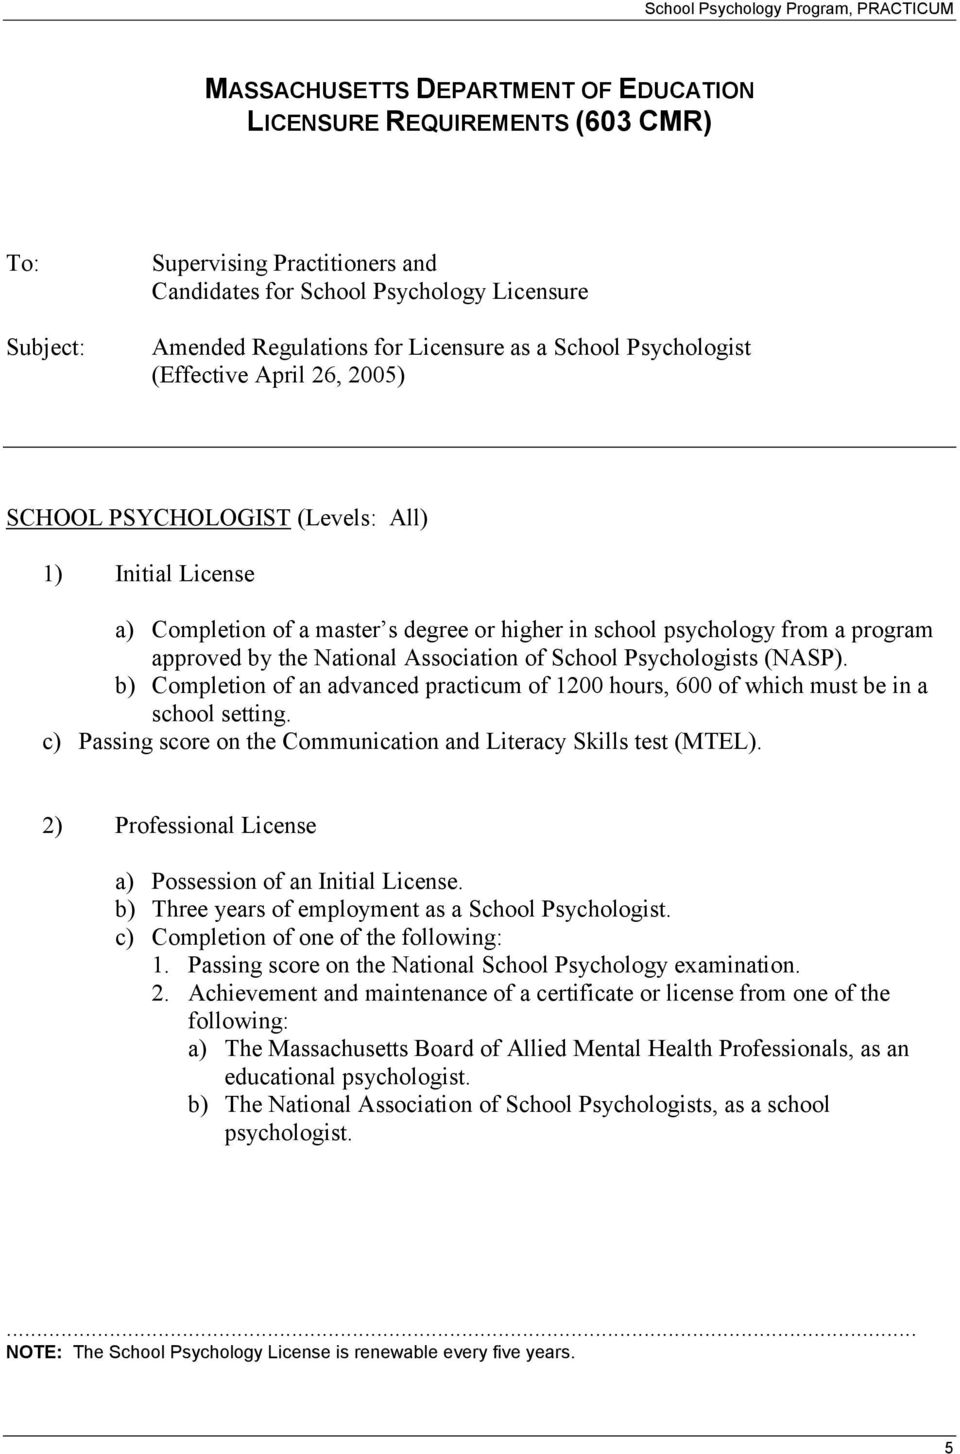 National Association of School Psychologists (NASP). b) Completion of an advanced practicum of 1200 hours, 600 of which must be in a school setting.